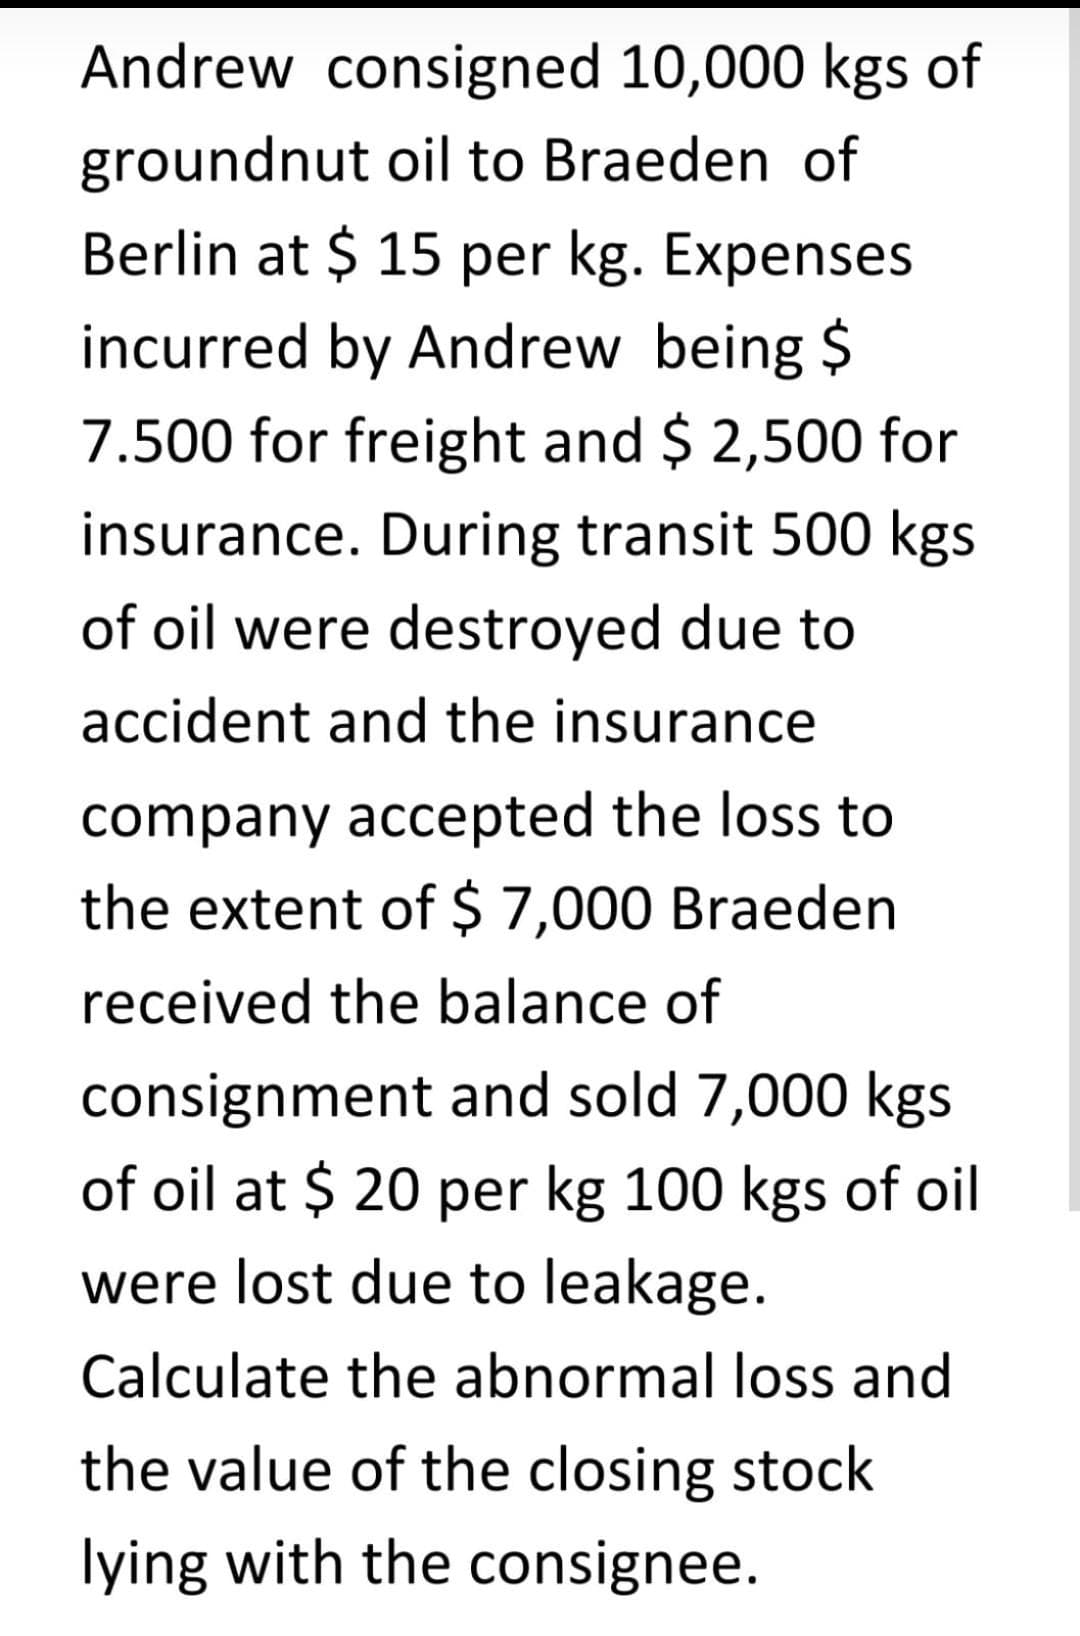 Andrew consigned 10,000 kgs of
groundnut oil to Braeden of
Berlin at $ 15 per kg. Expenses
incurred by Andrew being $
7.500 for freight and $ 2,500 for
insurance. During transit 500 kgs
of oil were destroyed due to
accident and the insurance
company accepted the loss to
the extent of $ 7,000 Braeden
received the balance of
consignment and sold 7,000 kgs
of oil at $ 20 per kg 100 kgs of oil
were lost due to leakage.
Calculate the abnormal loss and
the value of the closing stock
lying with the consignee.